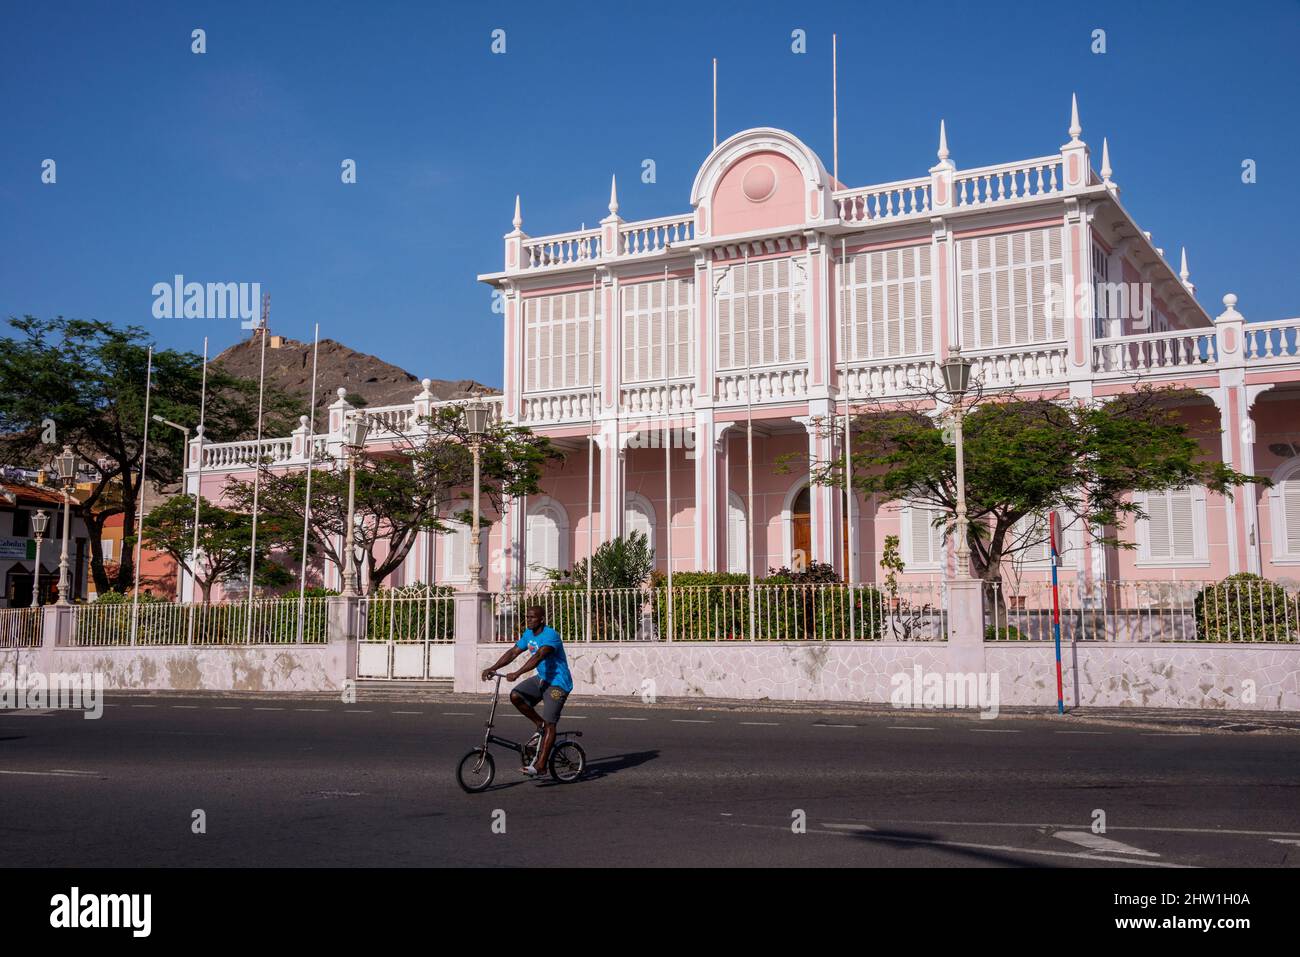 People's Palace in the urban center of the city of Mindelo capital of the island of São Vicente, Cape Verde Stock Photo